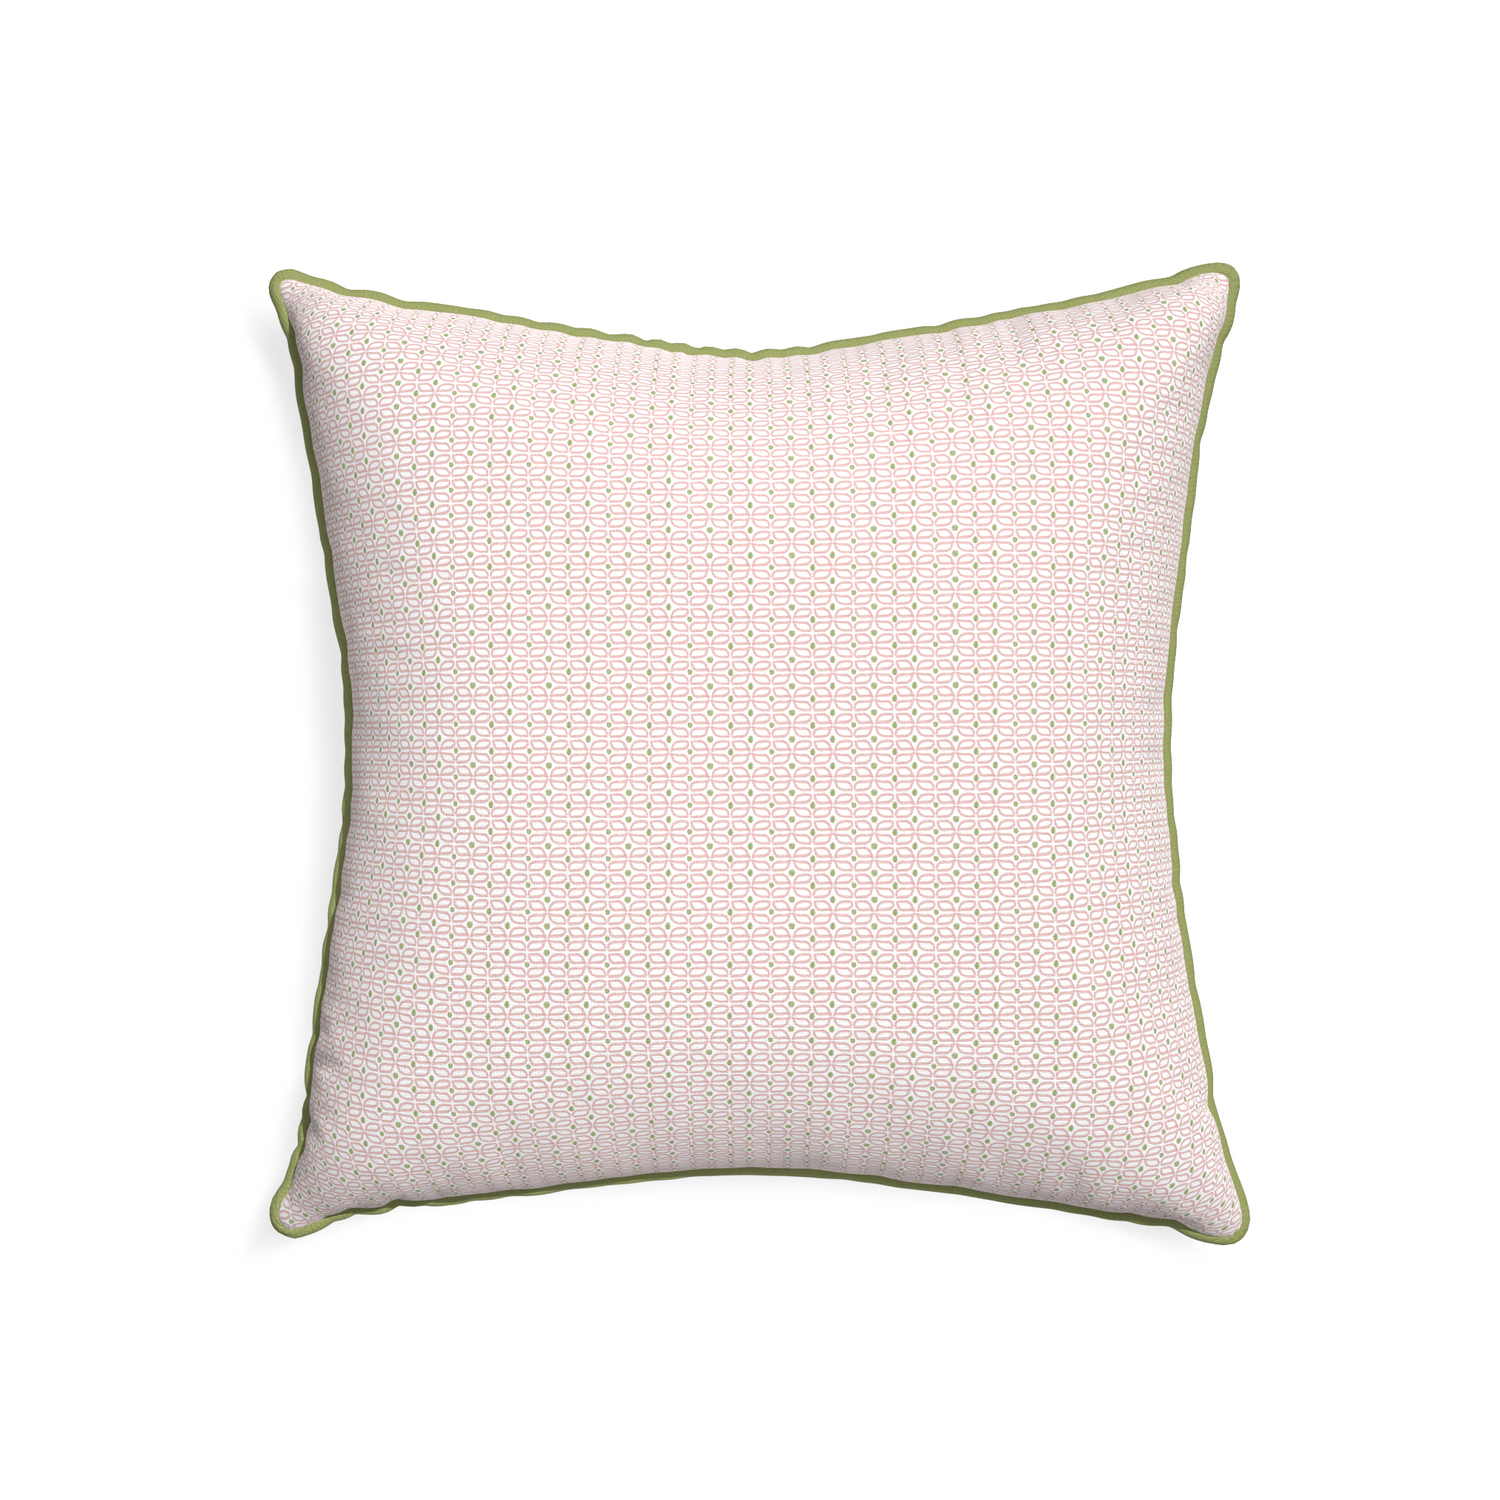 Southern Home Blanks Pink Seersucker Embroidery Blanks (pillow wraps)